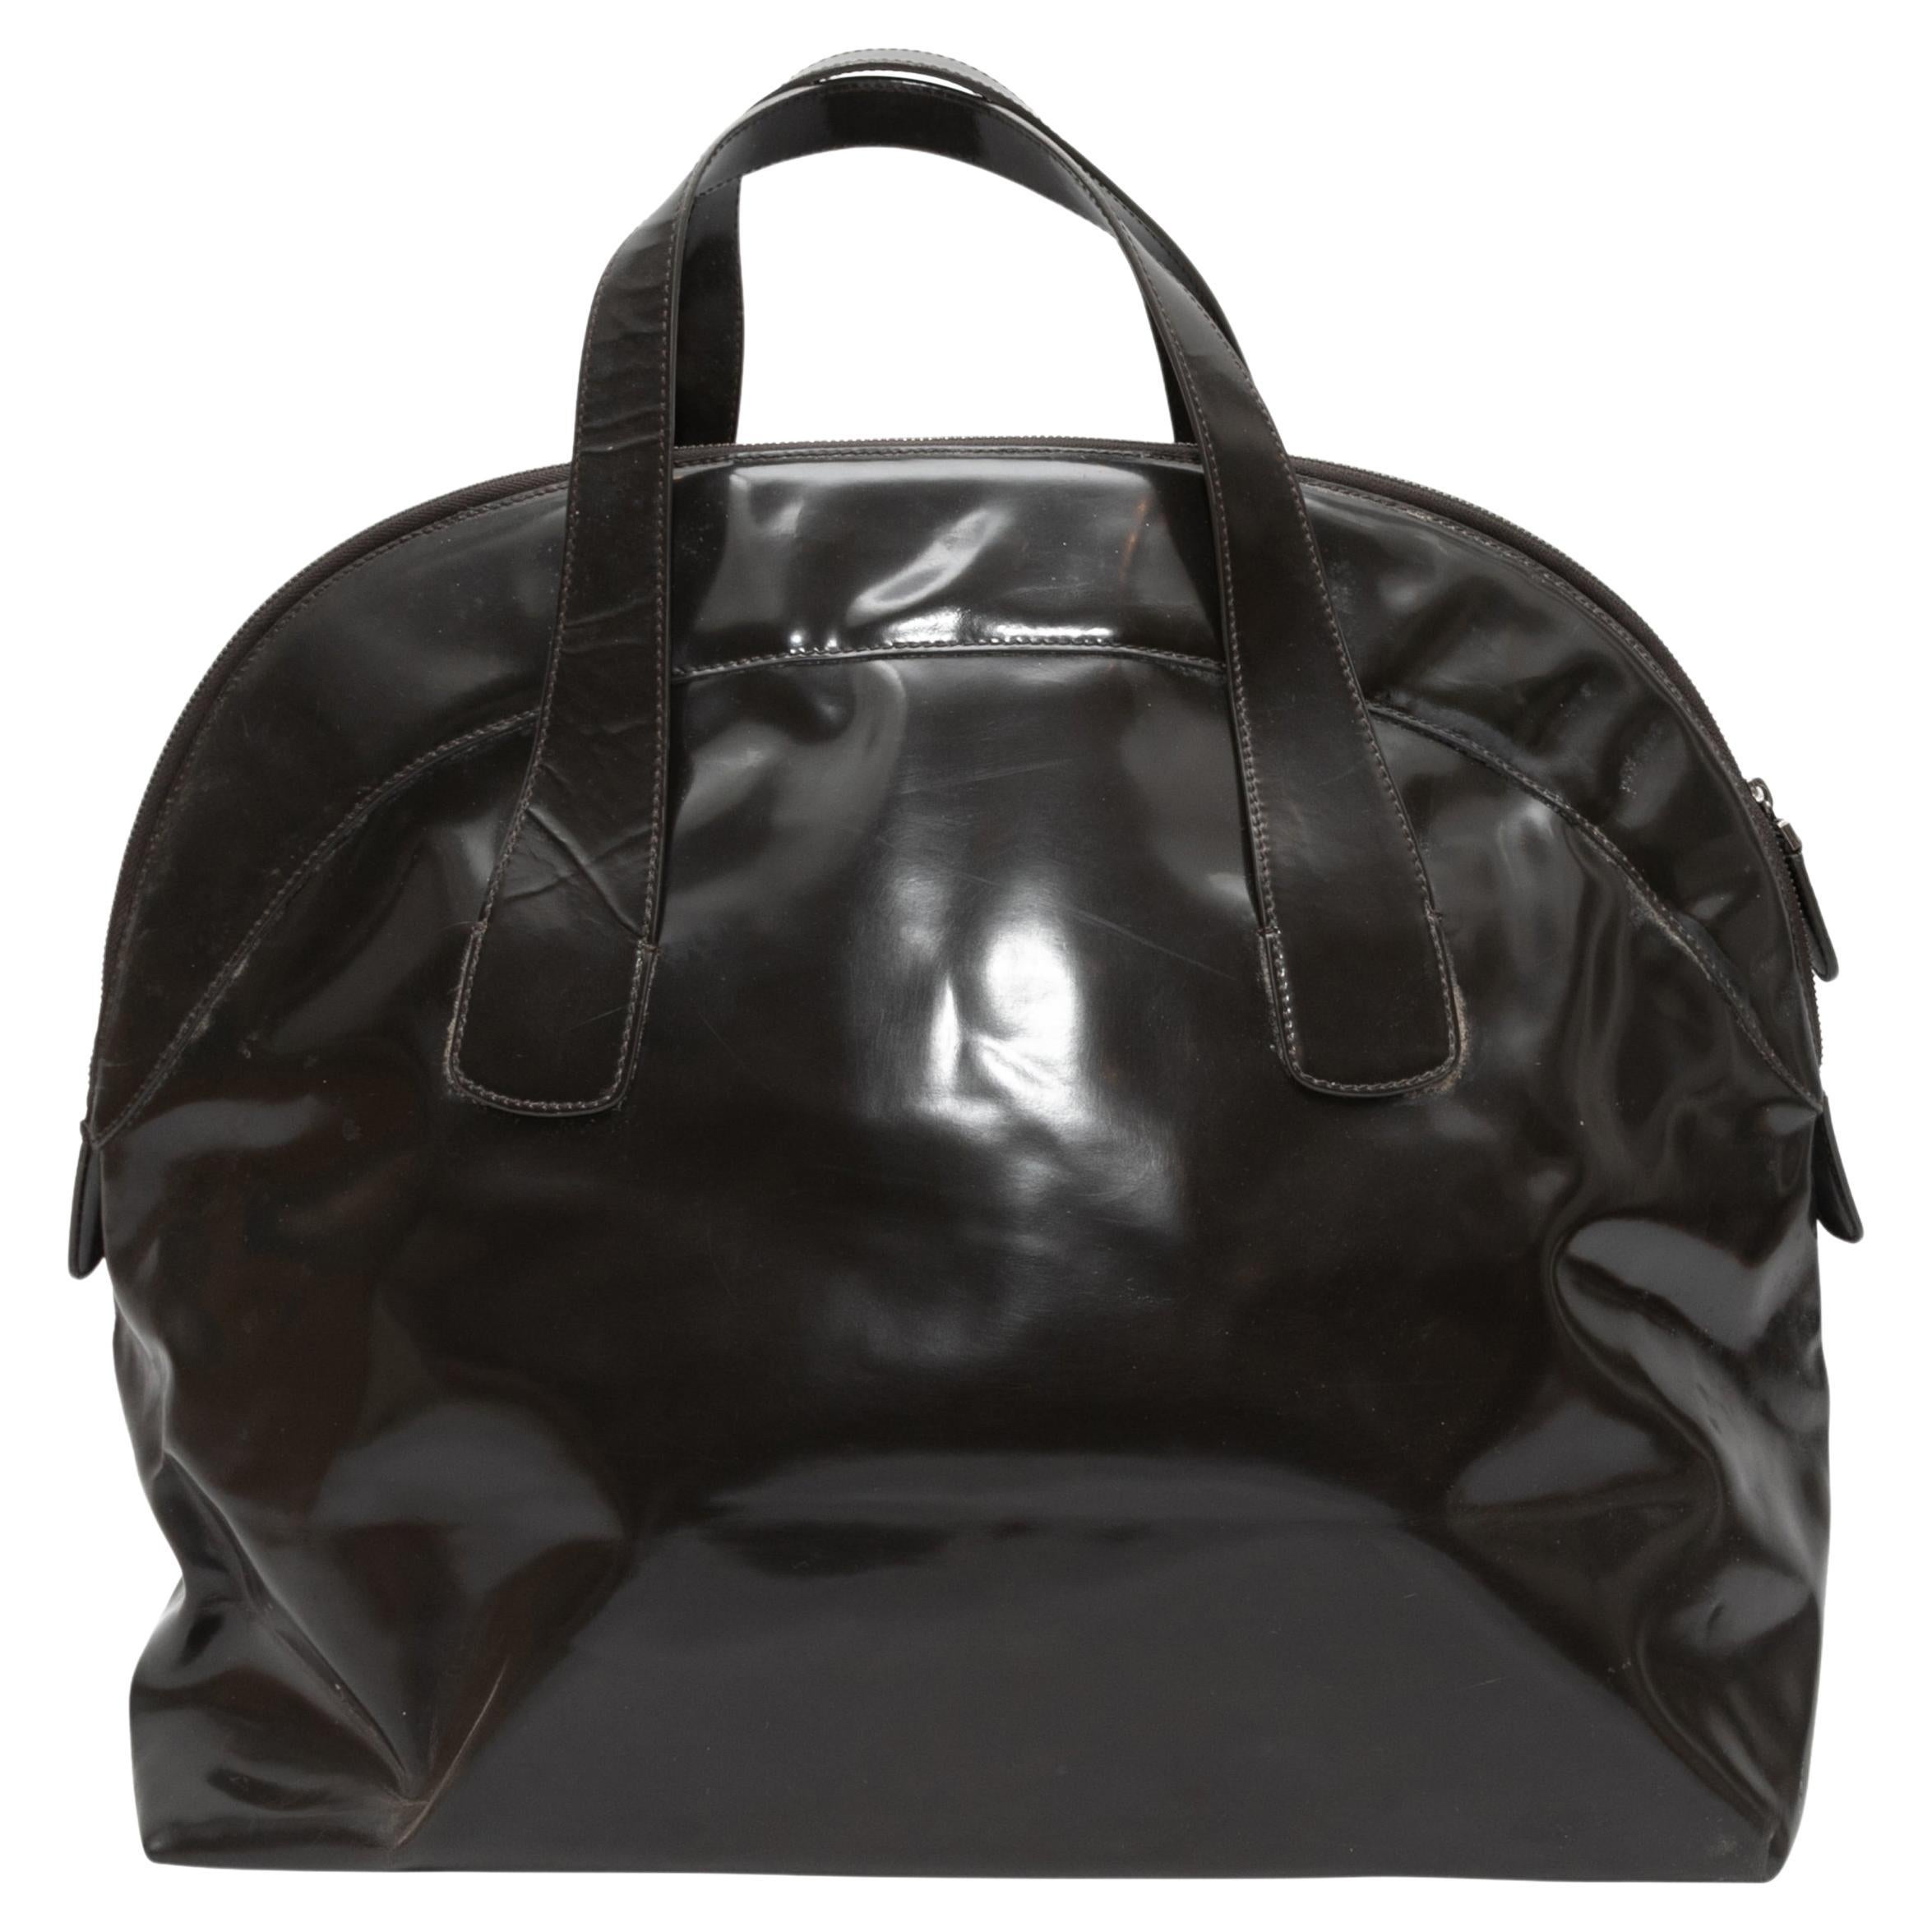 Black Marni Patent Top Handle Bowler Bag. This bag features a patent leather body, dual flat top handles, and a top zip closure. 22.5